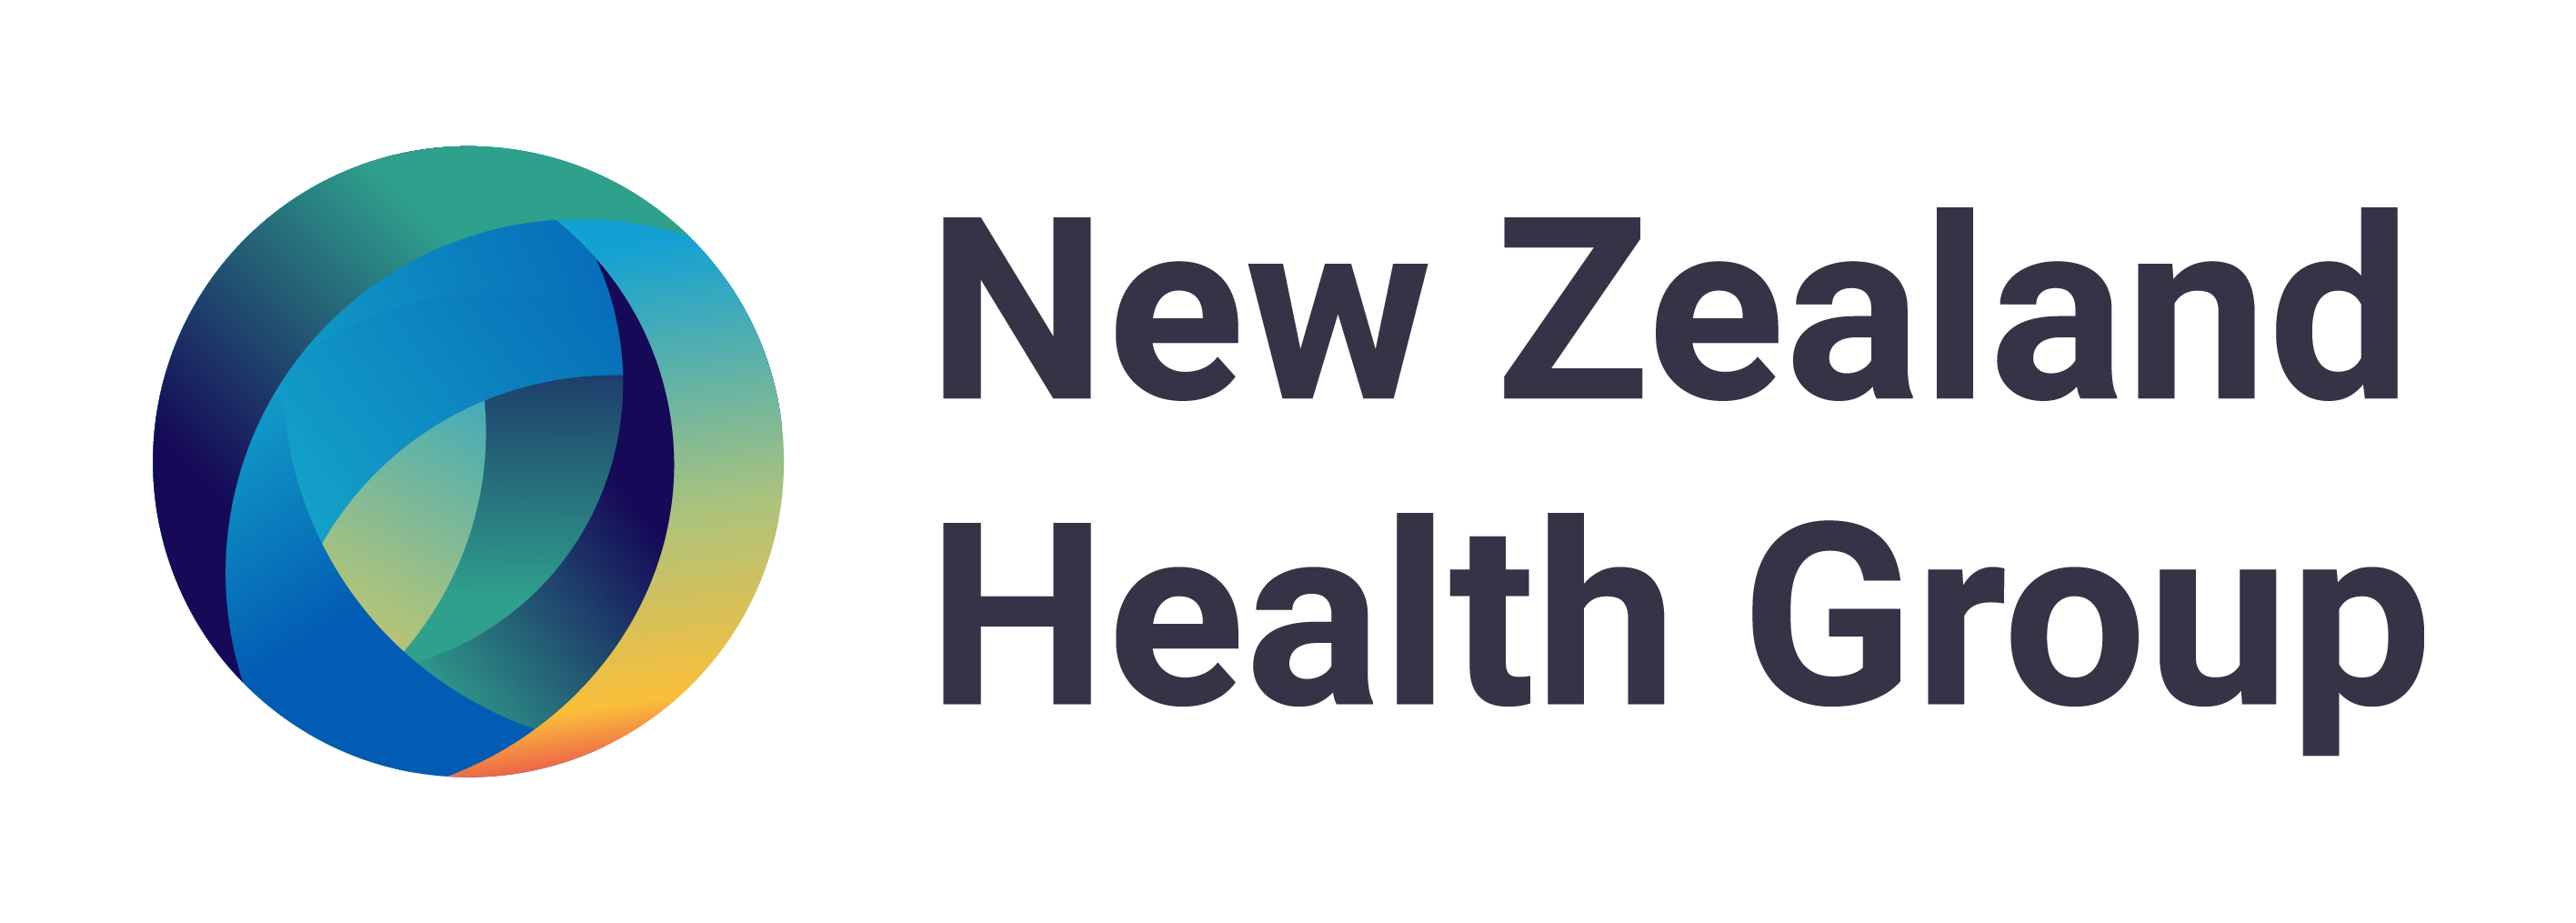 New Zealand Health Group are exhibiting at Nursing Careers and Jobs Fair